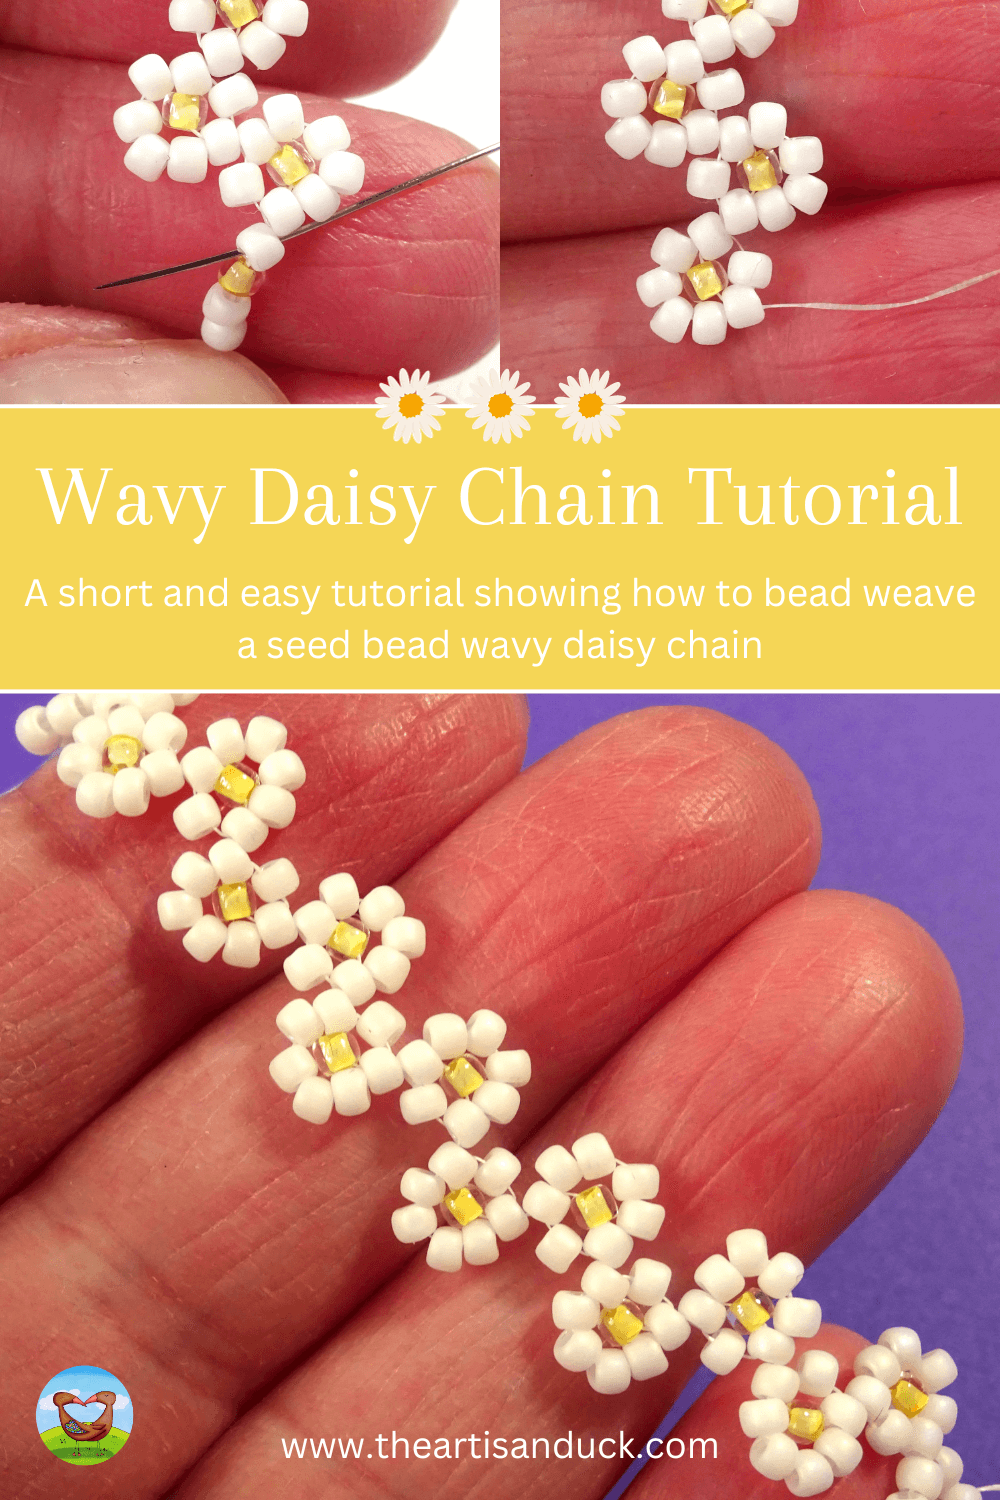 How To Bead Weave A Wavy Daisy Chain – An Easy Seed Bead Tutorial